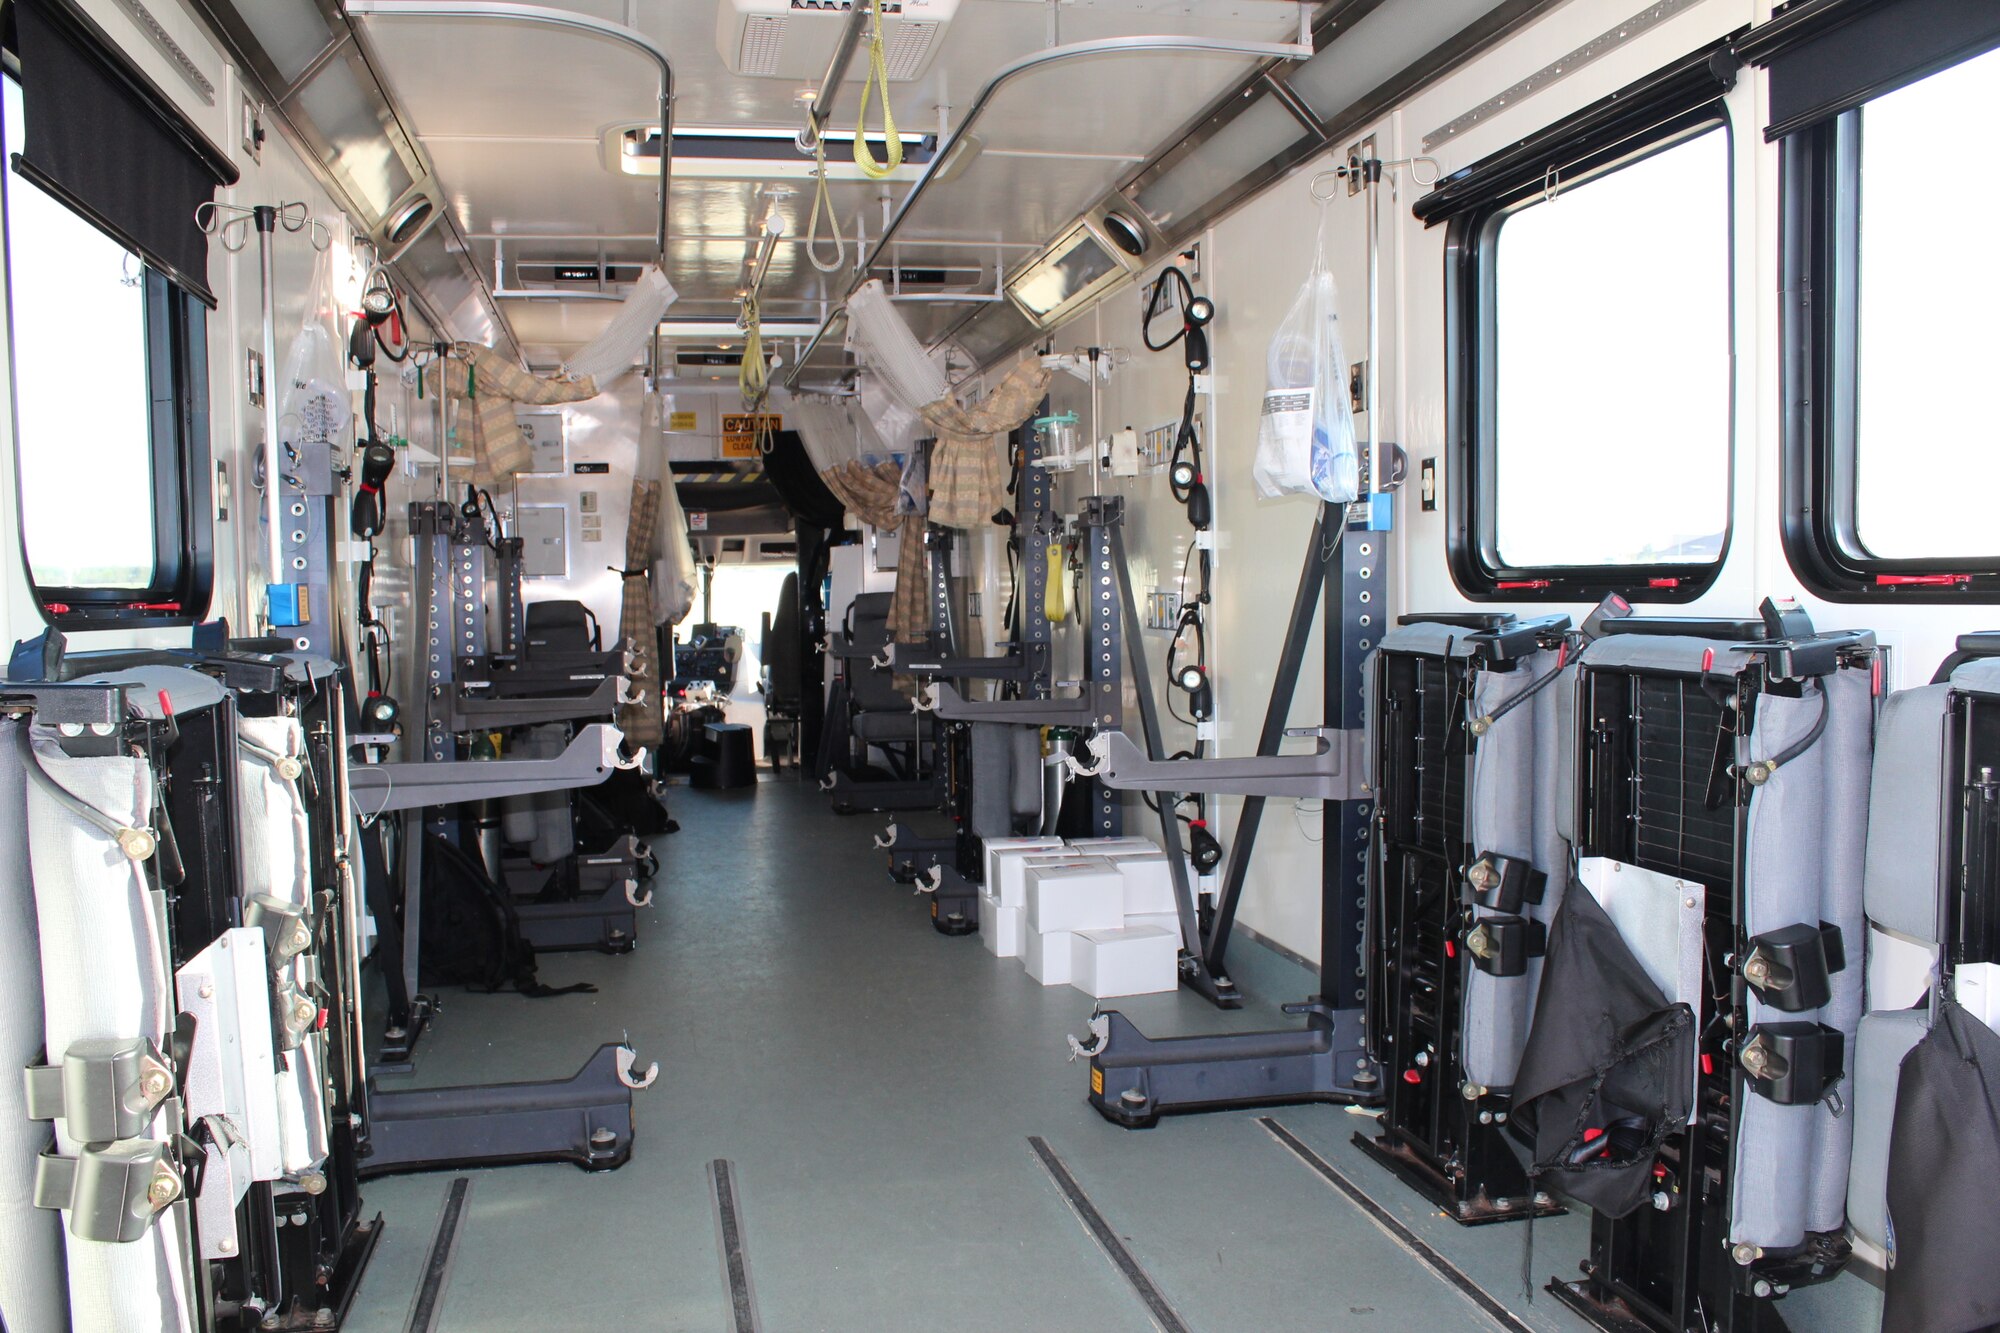 Interior view of an ambulance parked at Joint Base Andrews, Md., April 26, 2018. Buses are with equipment to provide critical care when transferring patients. (U.S. Air Force photo by Karina Luis)